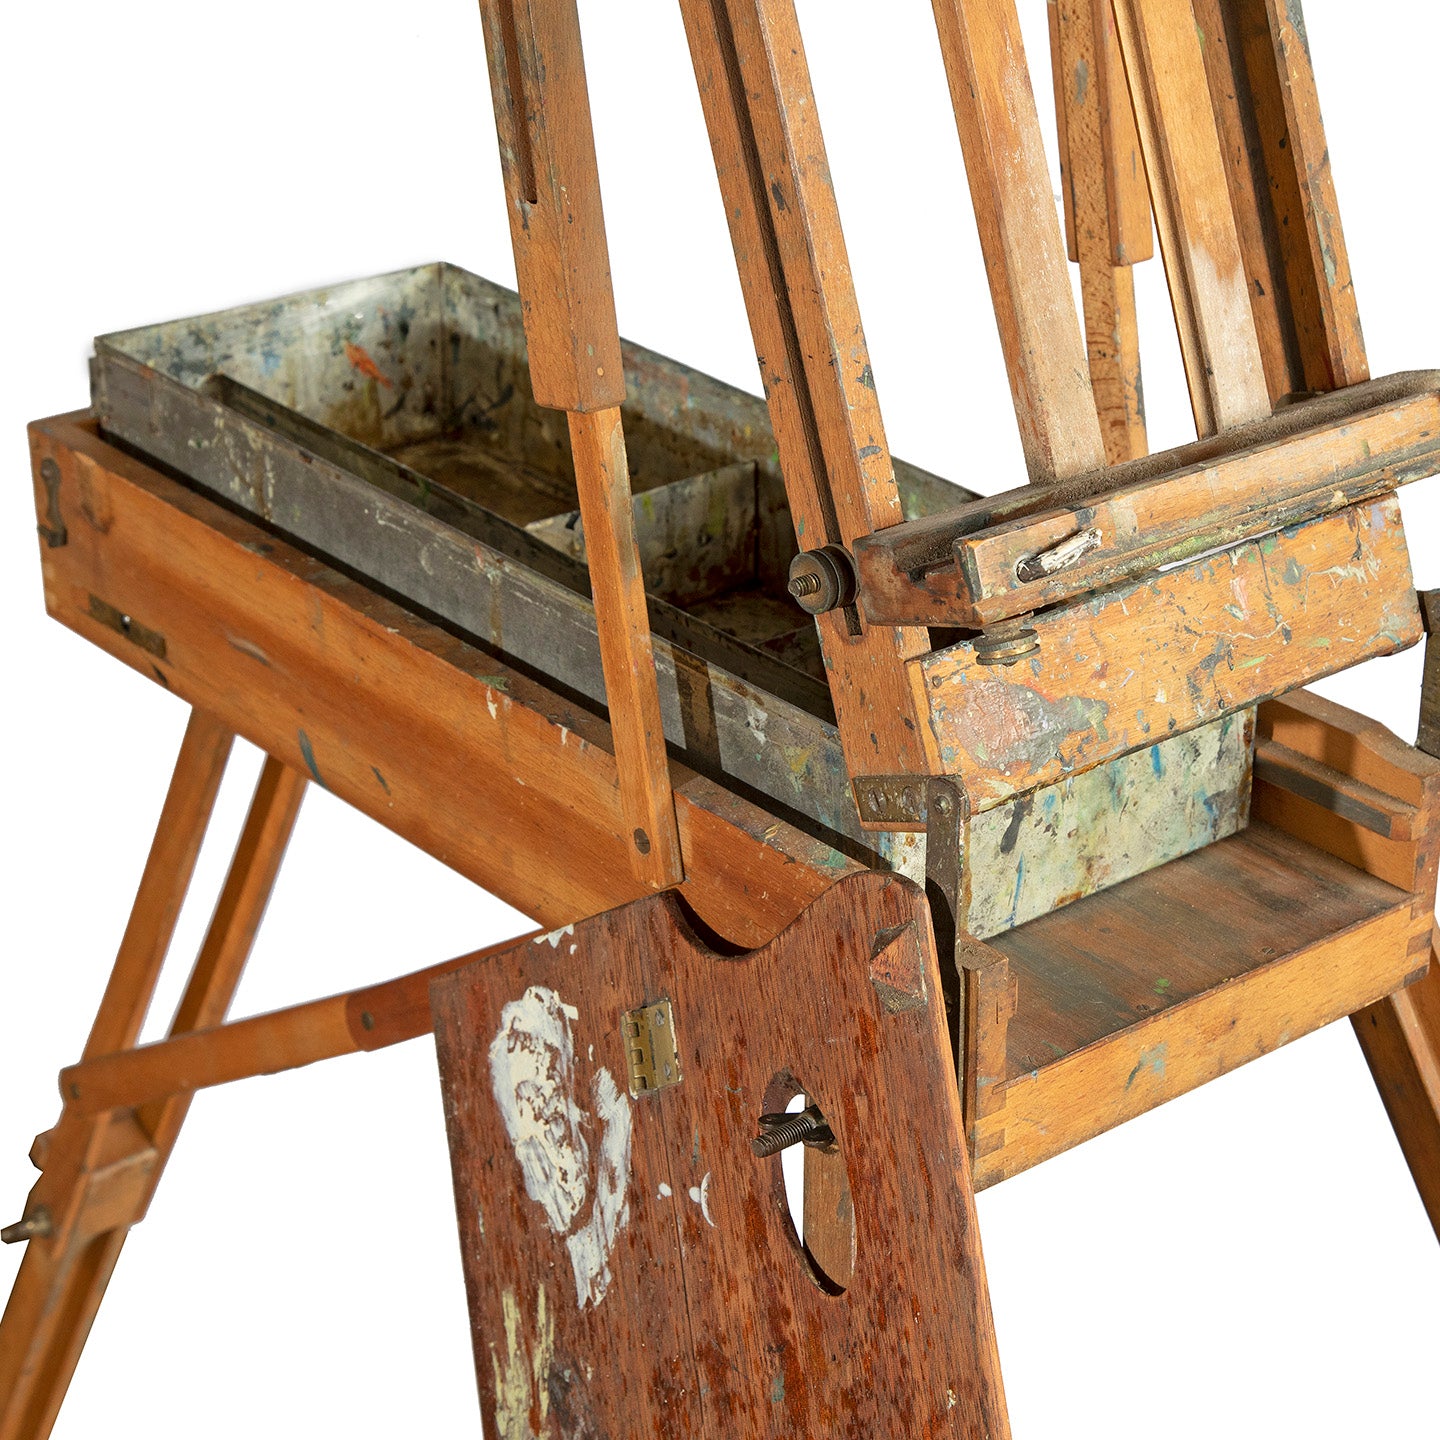 Sold at Auction: VINTAGE TRIDENT PORTABLE EASEL